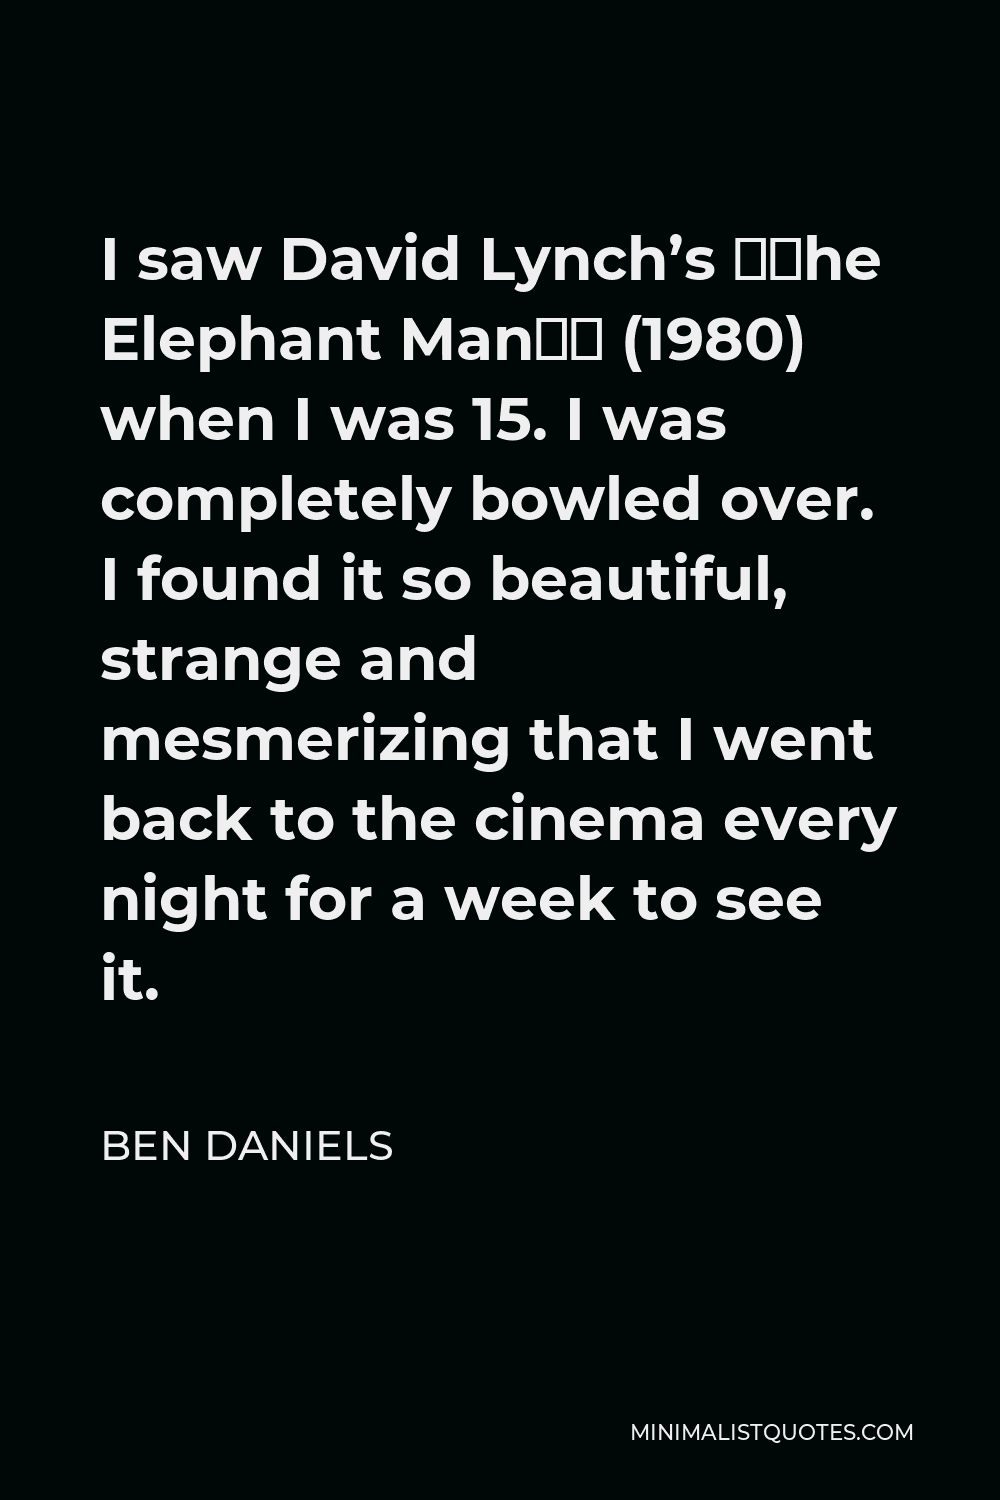 Ben Daniels Quote - I saw David Lynch’s “The Elephant Man” (1980) when I was 15. I was completely bowled over. I found it so beautiful, strange and mesmerizing that I went back to the cinema every night for a week to see it.